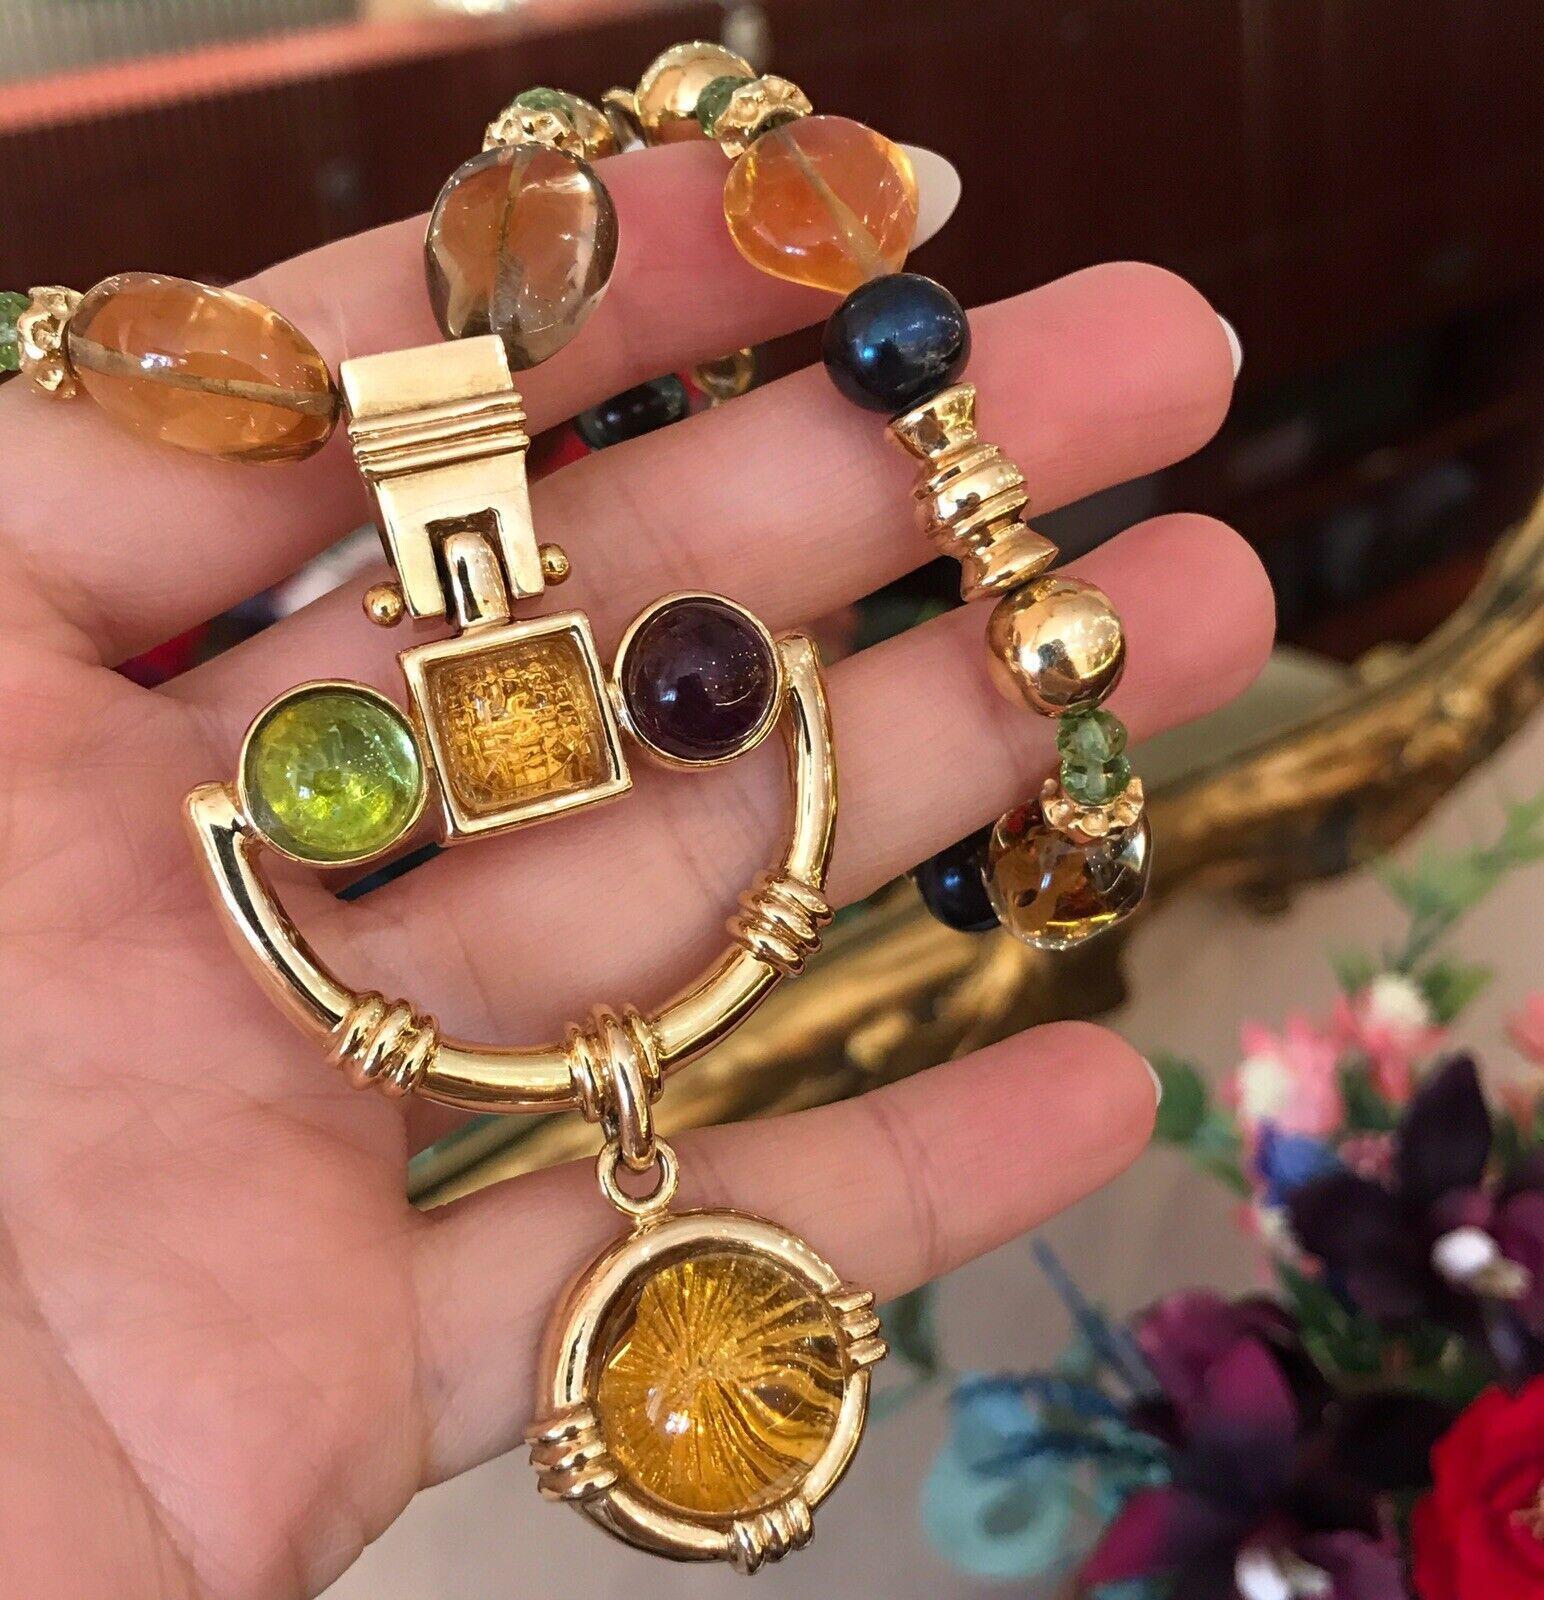 20 Inch Beaded Pendant Necklace with Citrine, Peridot, and Tourmaline in 14k Yellow Gold

Heavy Pendant Necklace features an 18-inch-long Beaded Necklace with a  Large Pendant Drop made of Citrine, Peridot, and Tourmaline in 14k Yellow